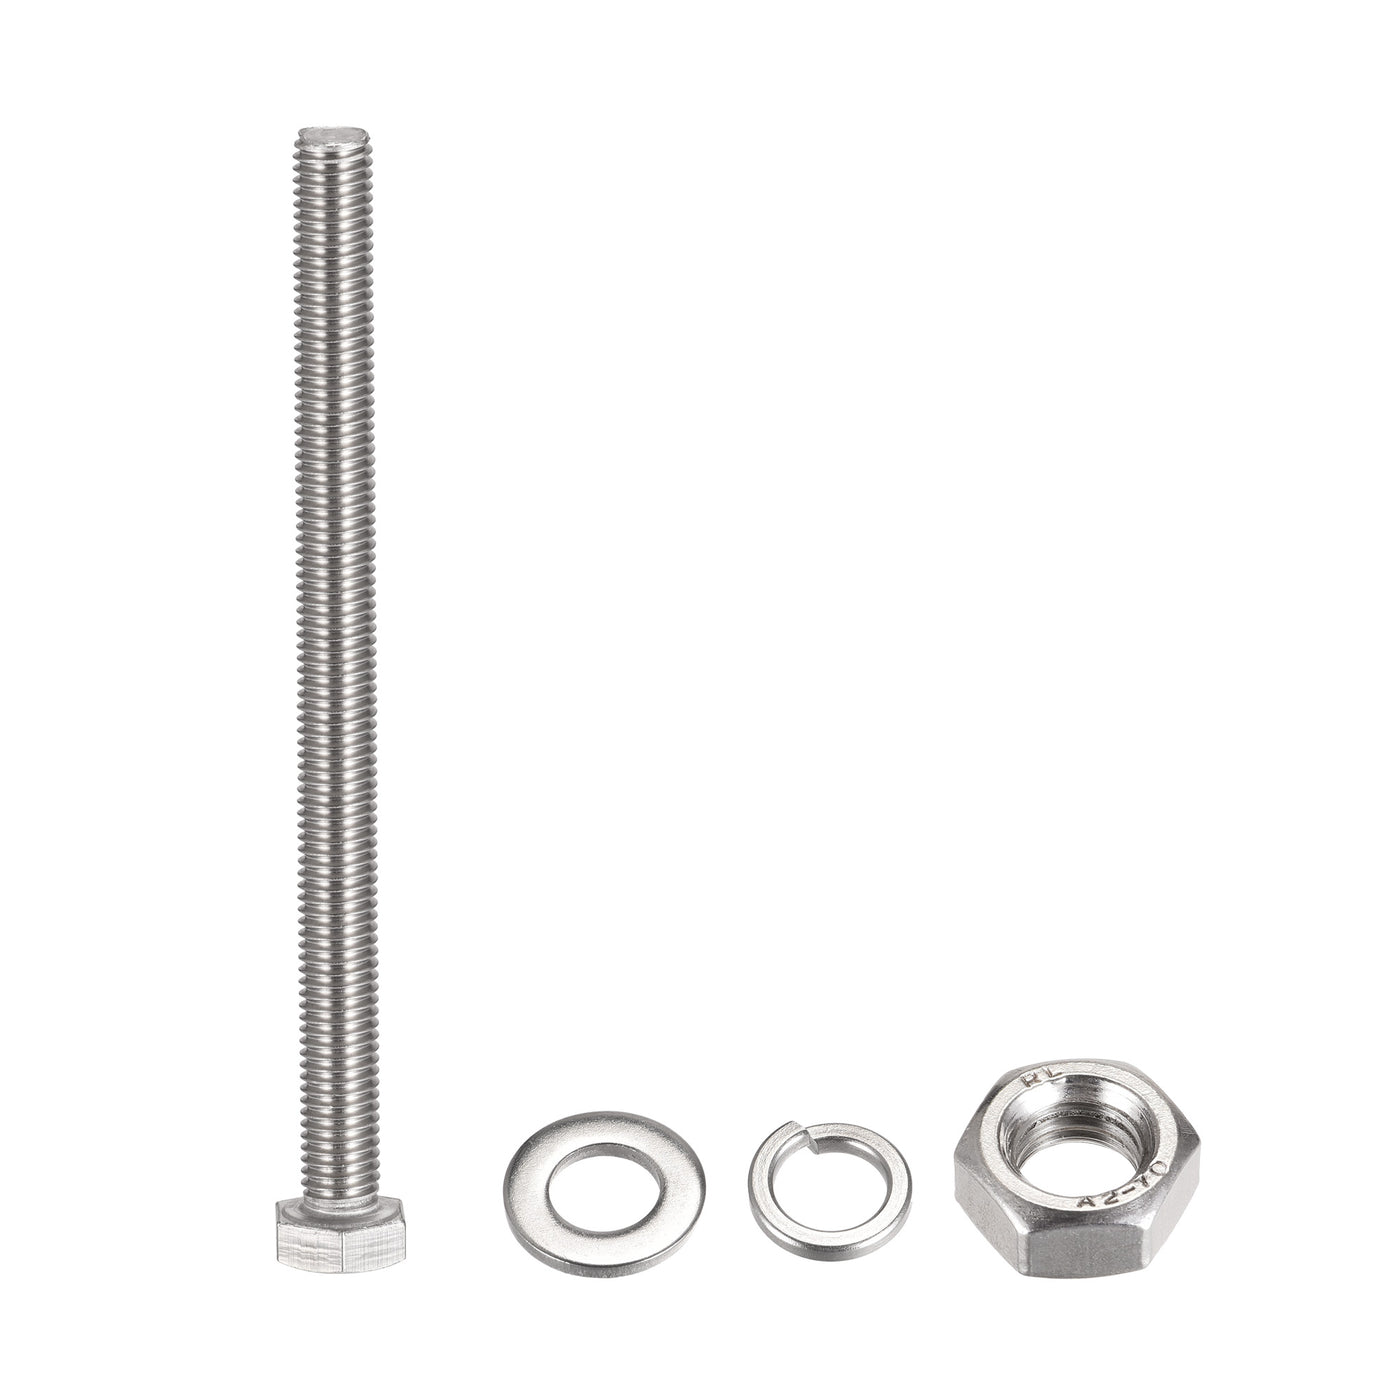 uxcell Uxcell M10 x 140mm Hex Head Screws Bolts, Nuts, Flat & Lock Washers Kits, 304 Stainless Steel Fully Thread Hexagon Bolts 4 Sets